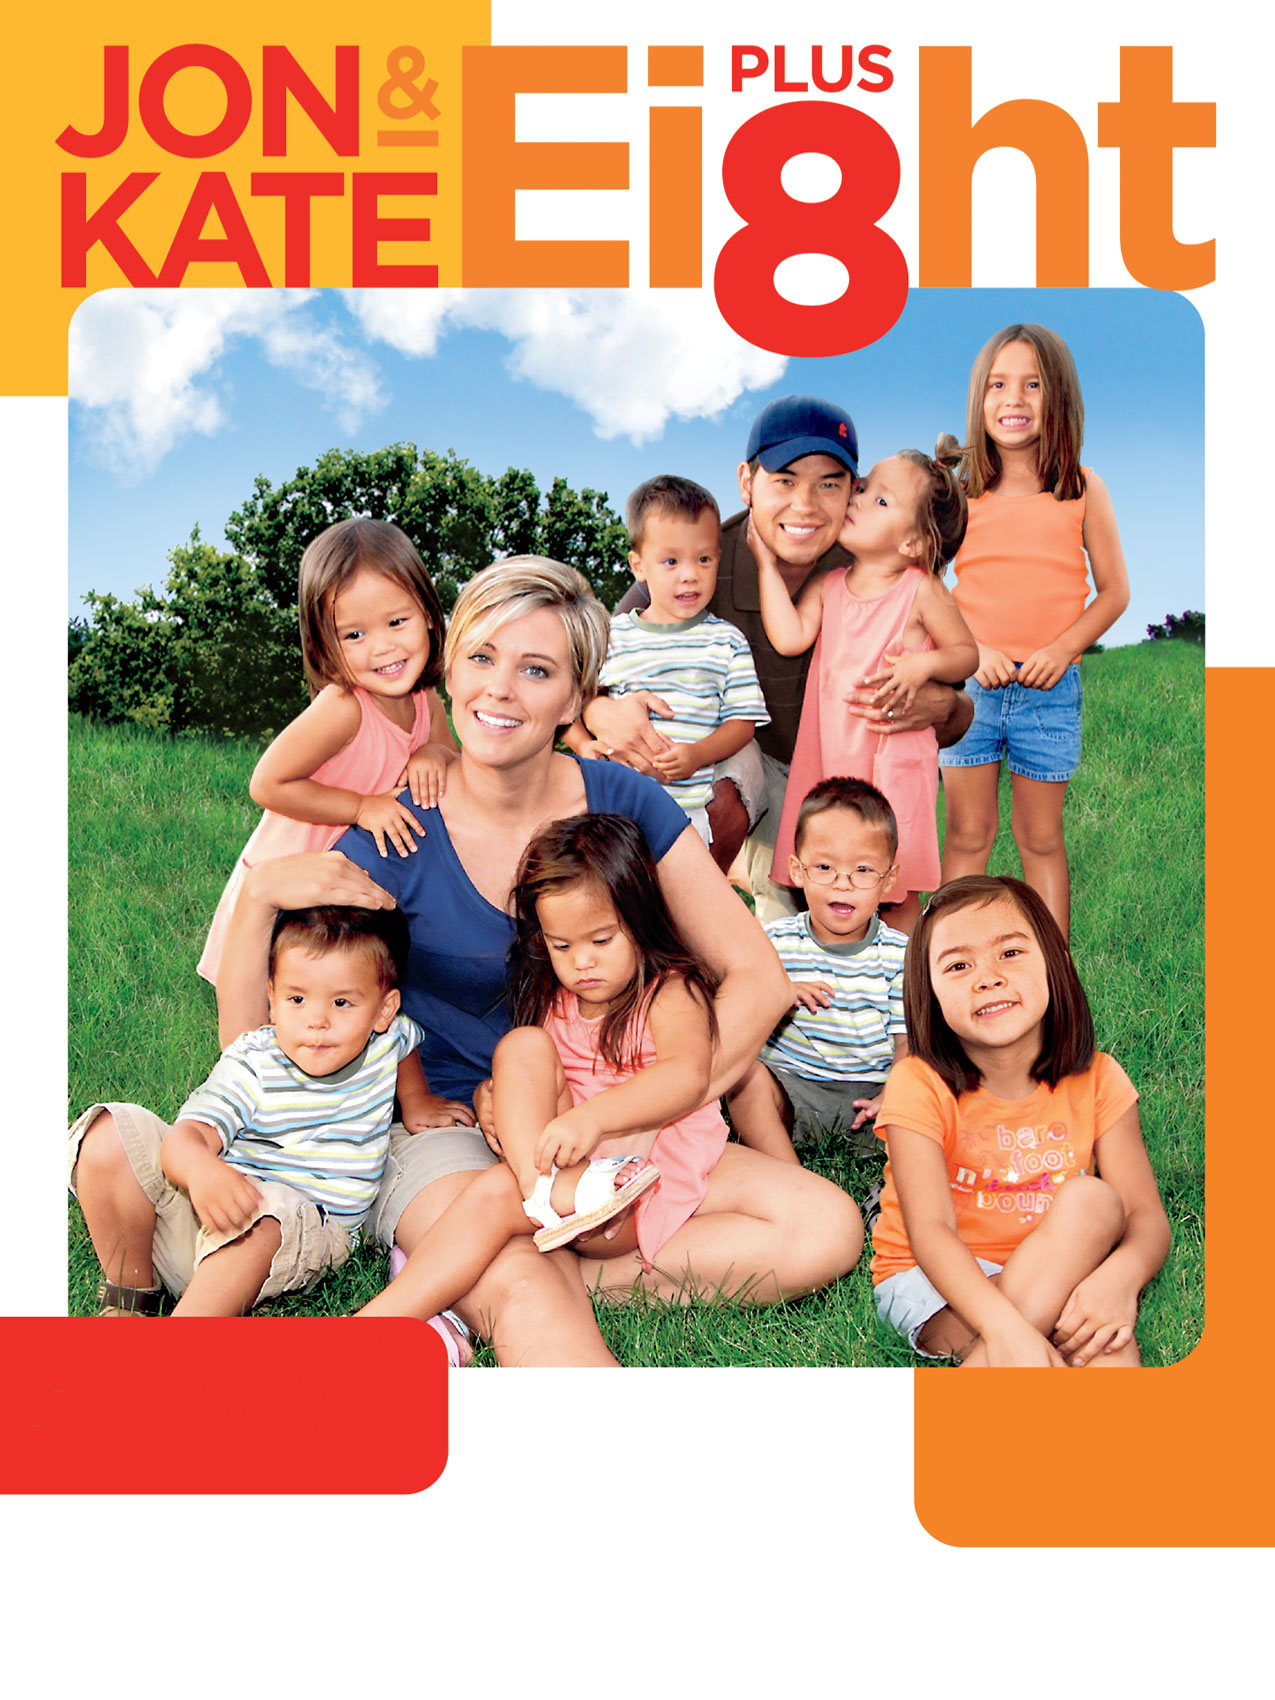 The former couple and their eight kids starred in reality TV show Jon and Kate Plus 8